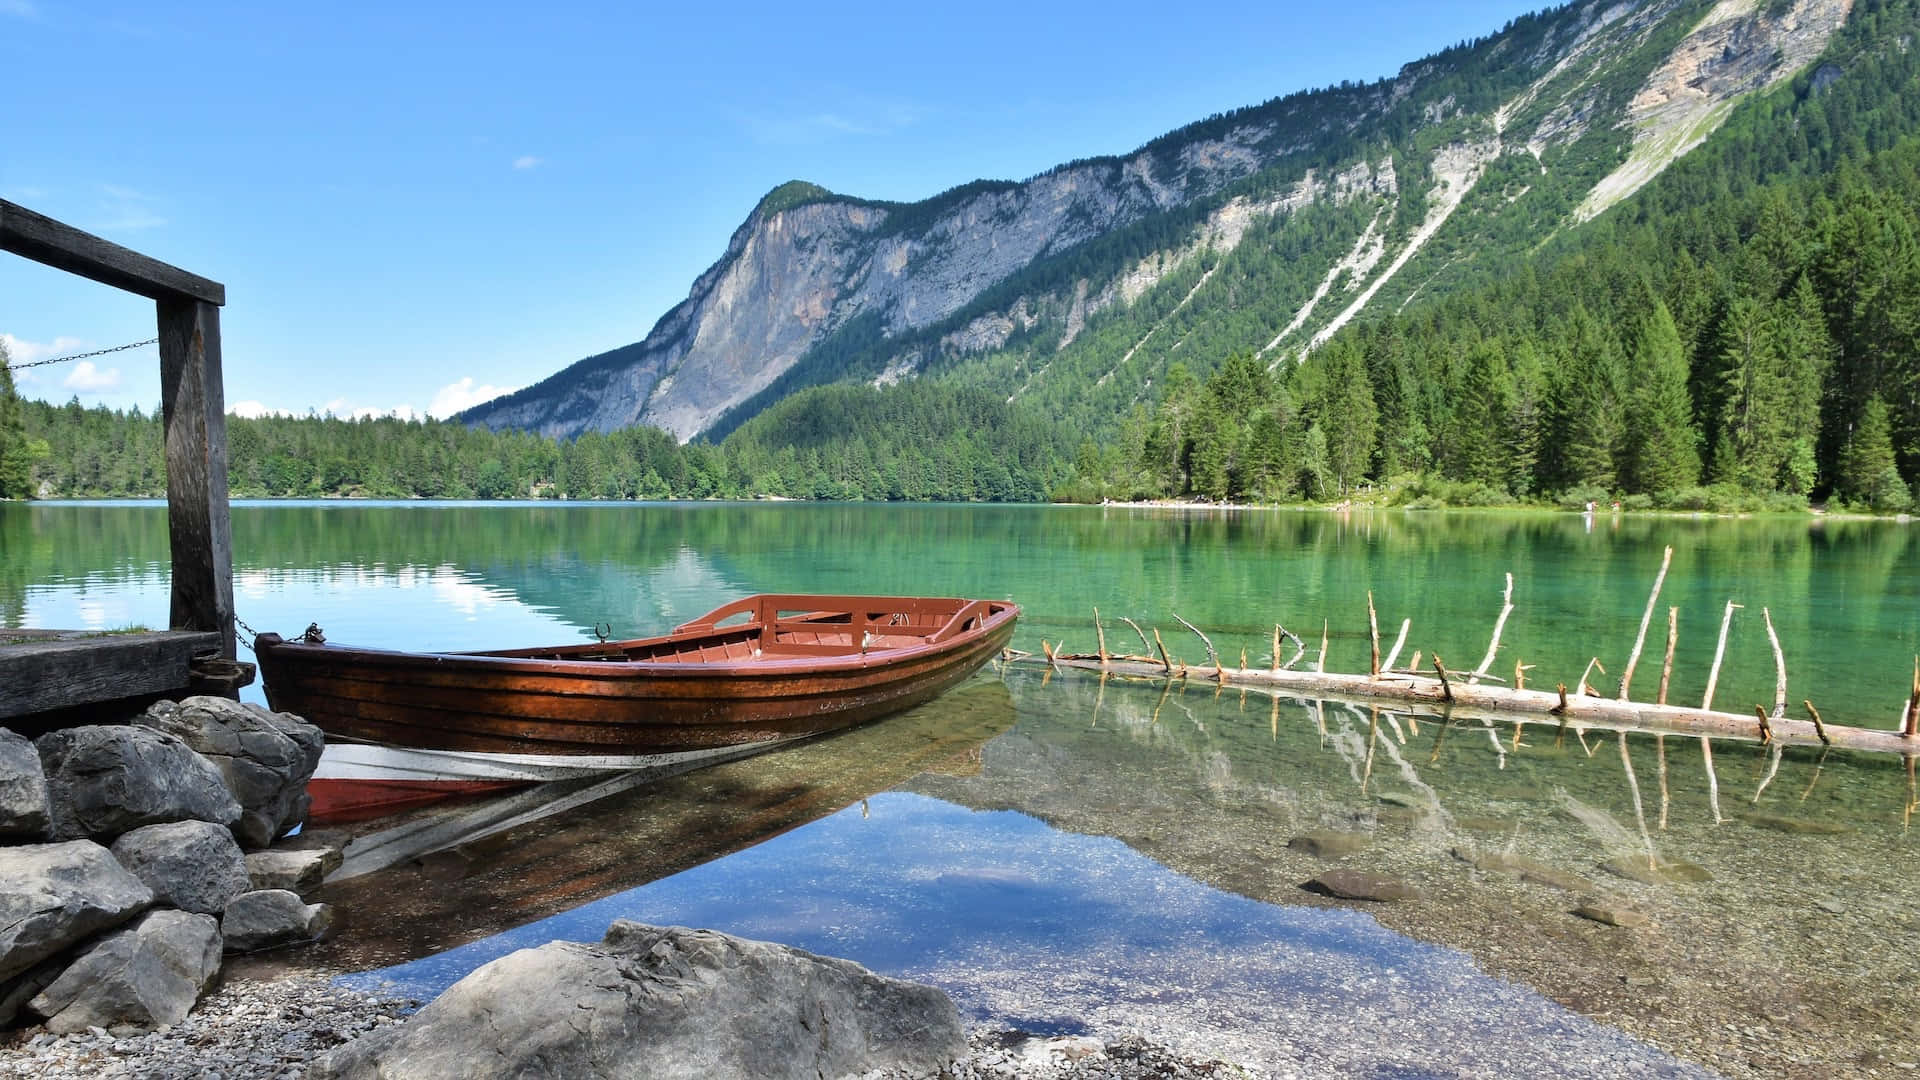 A Boat Docked In A Lake Near Mountains